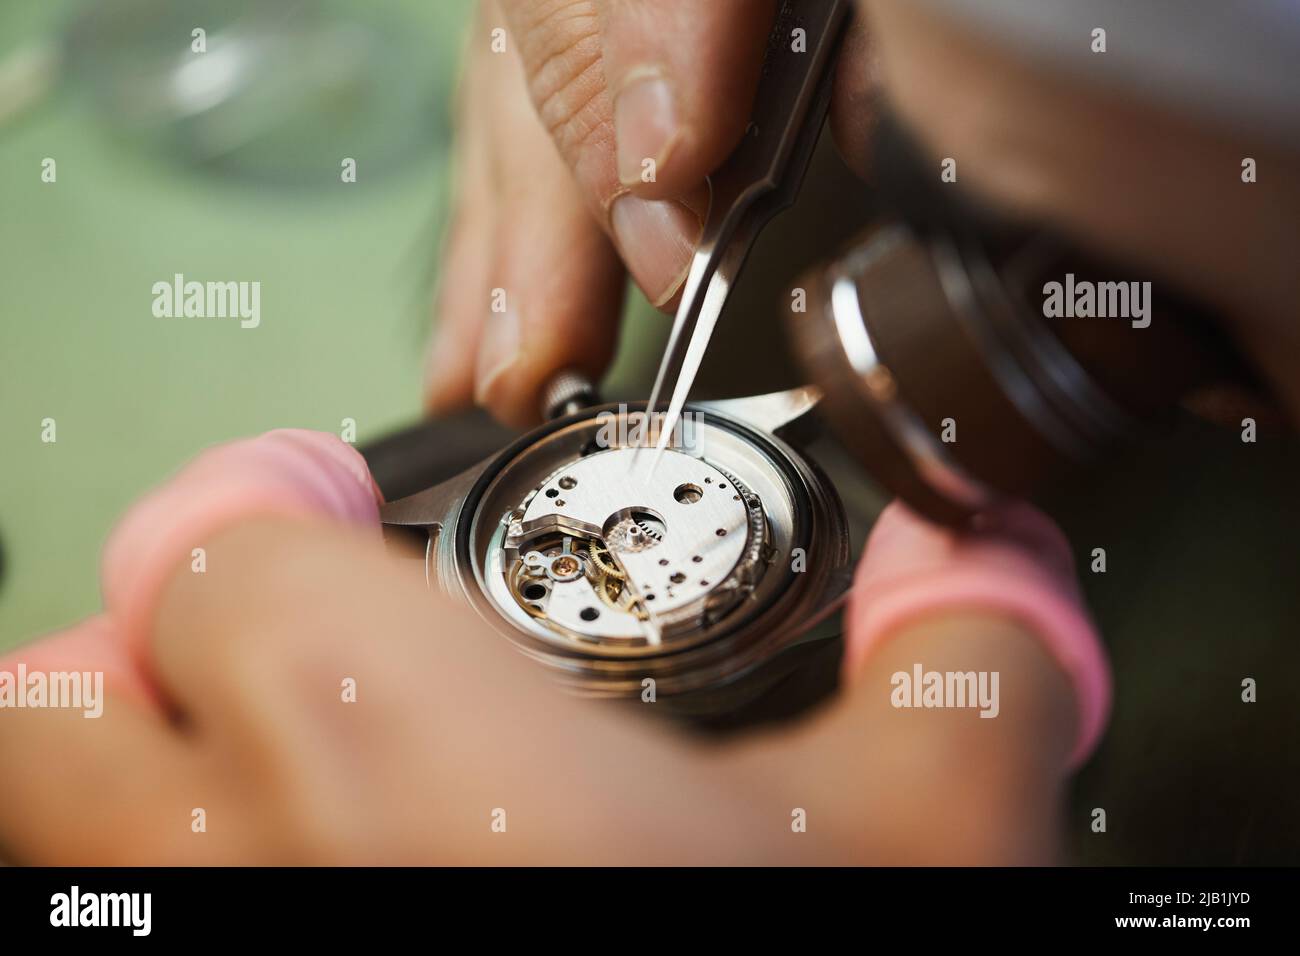 Macro of busy unrecognizable assembling engineer performing tedious work with watch cogs while examining mechanism Stock Photo